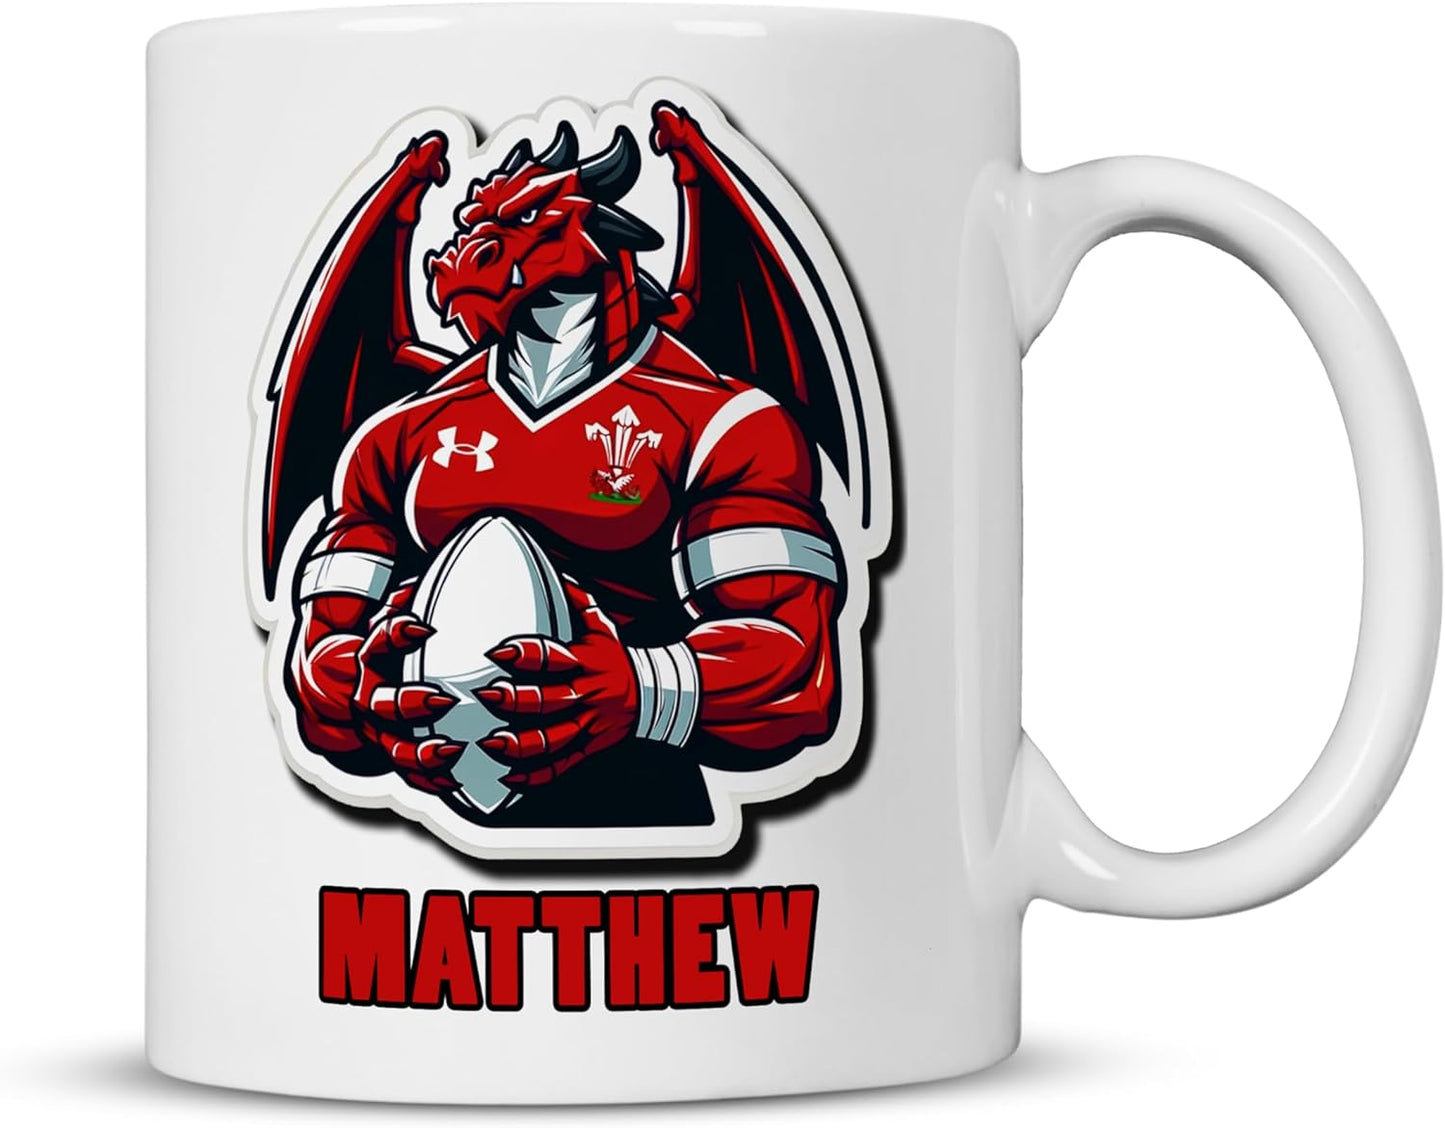 Welsh Dragon Wales Rugby Mug - 11oz Personalised Ceramic Cup - Add Any Name - Gift for Rugby Fans